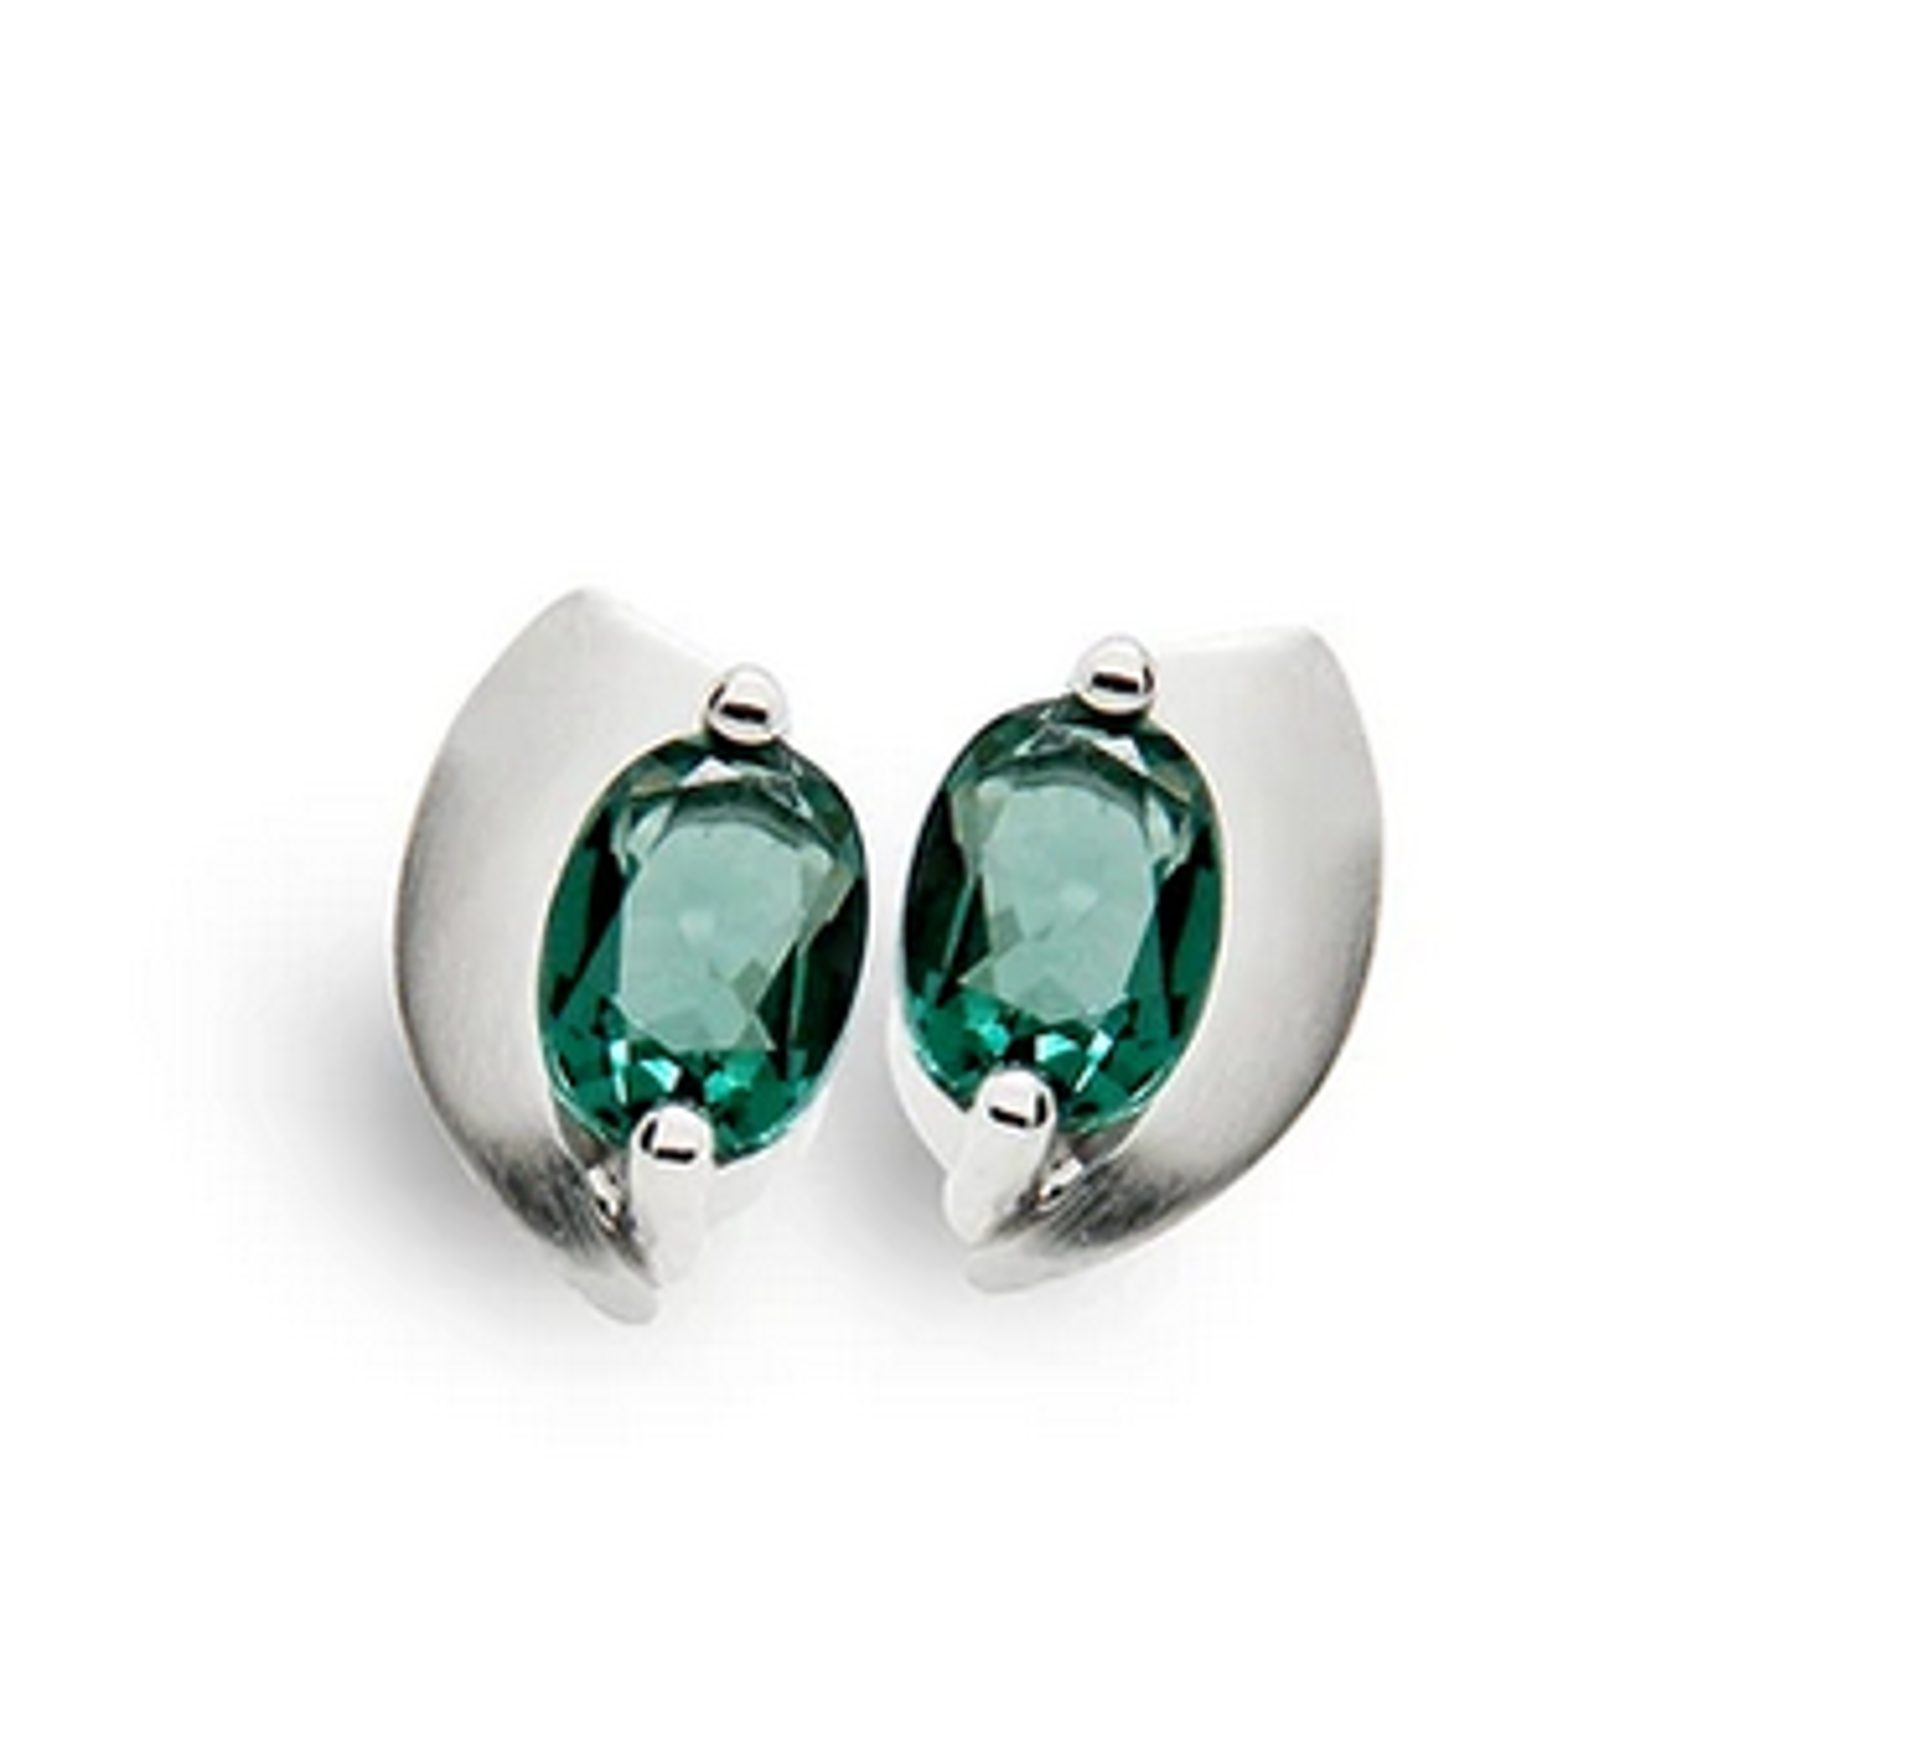 Earrings - Green Quartz With Polished Sterling Silver Droplet E9298GQ by Joryel Vera